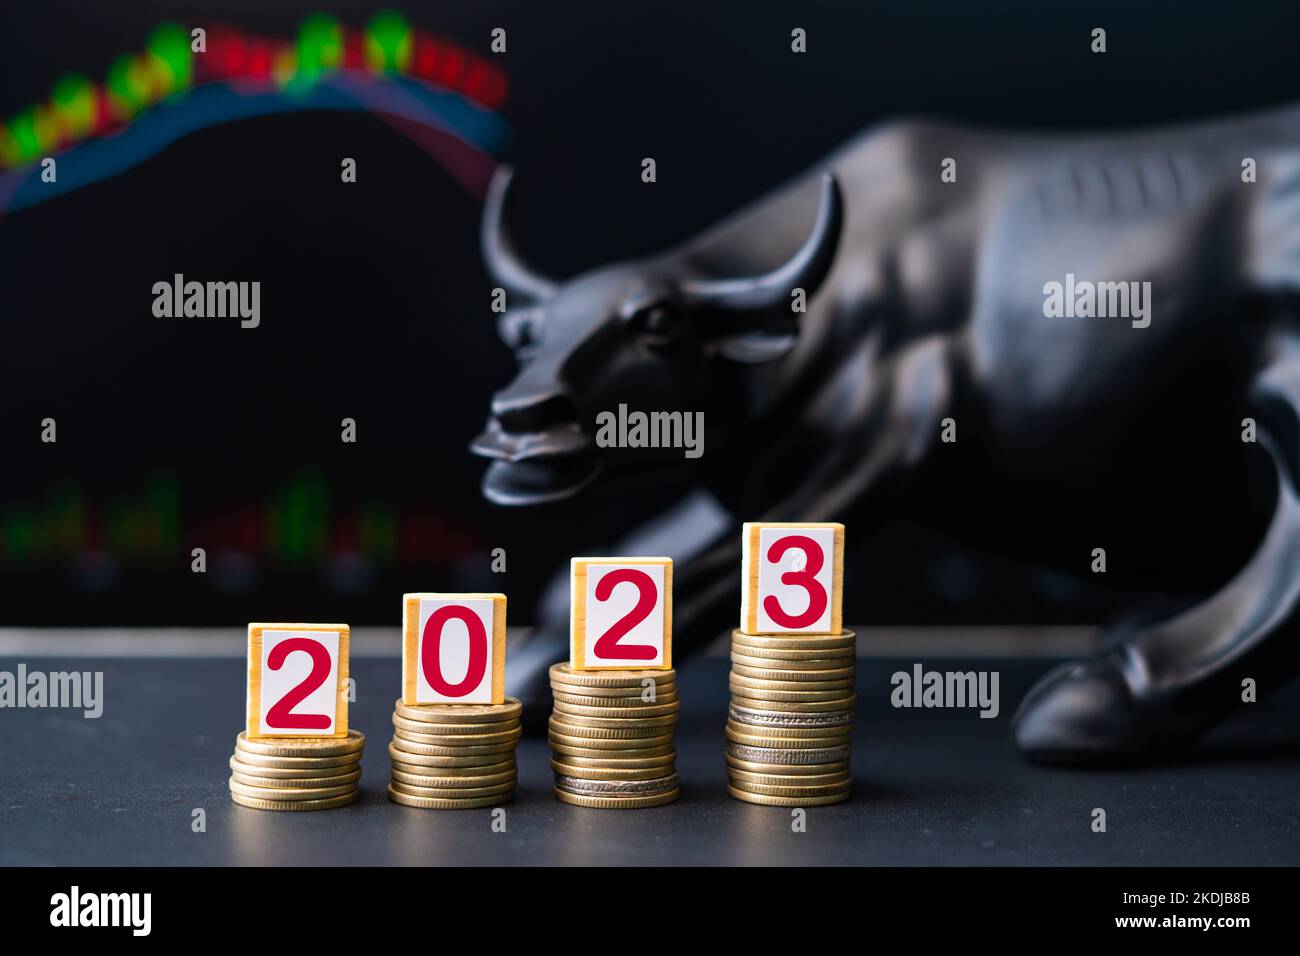 Concept showing of 2023 bullish stock market by placing coins in increasing order with running stock market charts Stock Photo